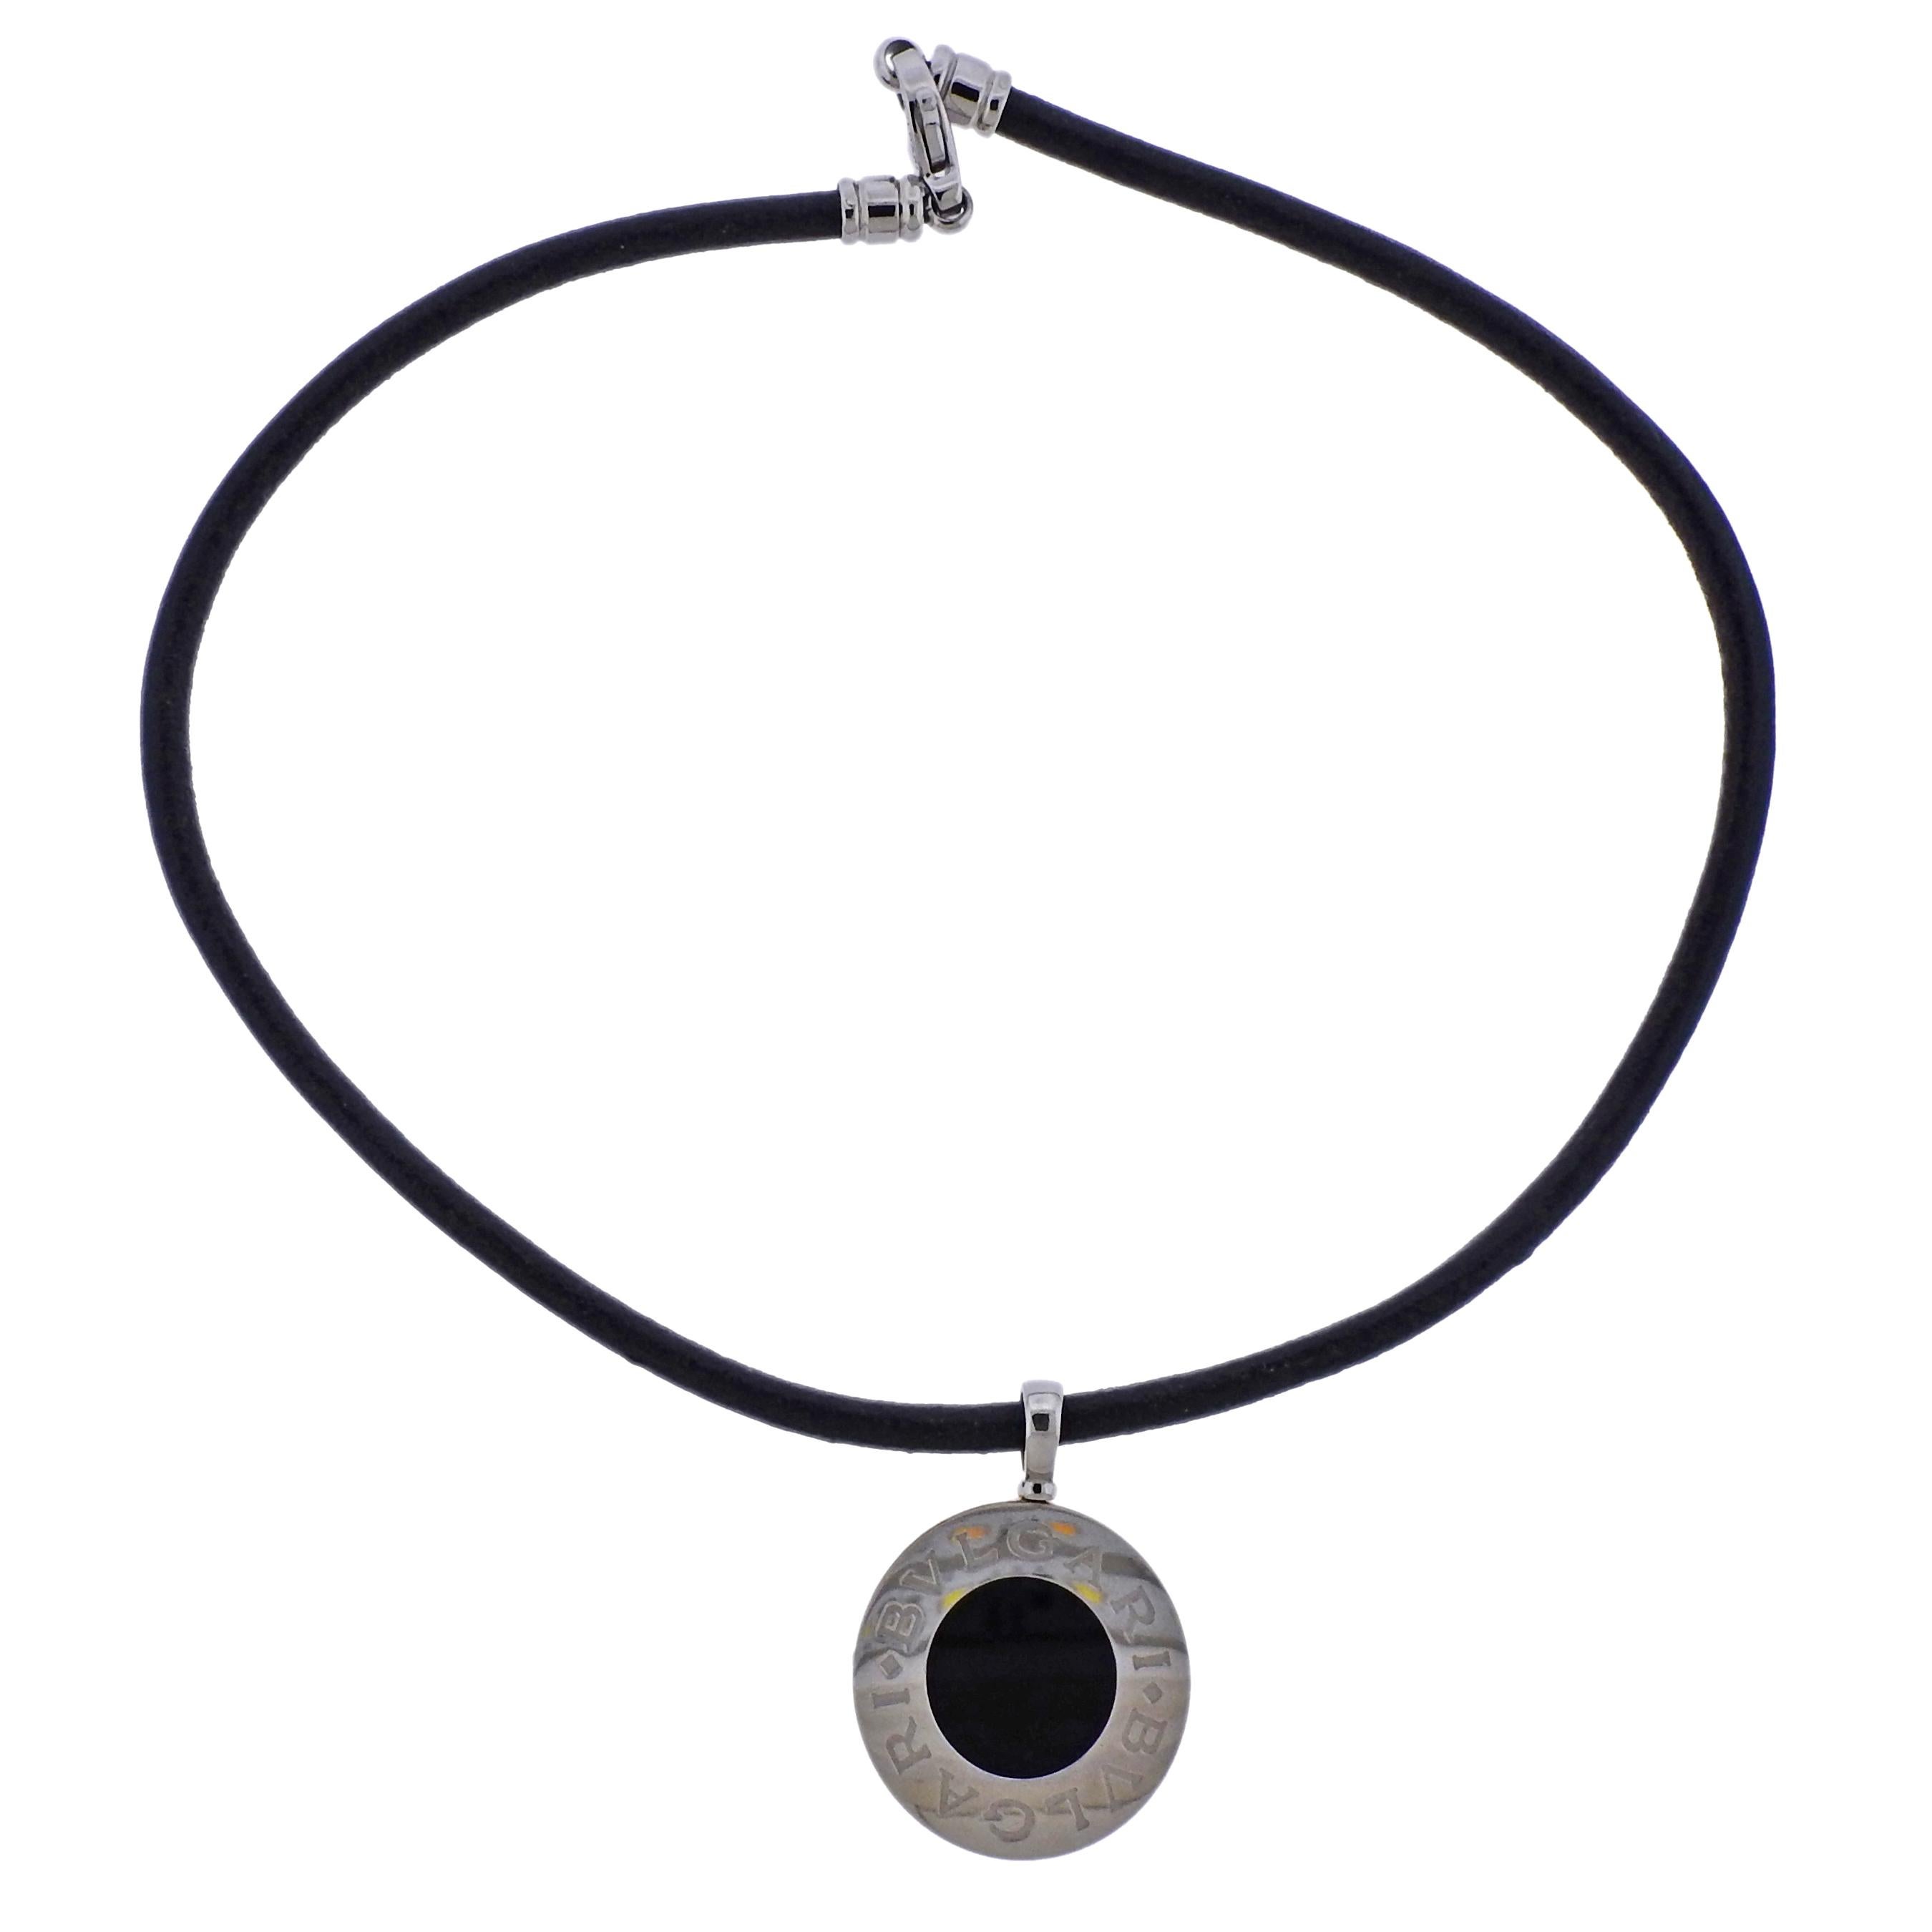 18k gold and stainless steel two sided pendant on a leather cord necklace, crafted by Bvlgari, featuring 19mm nephrite and onyx.  Necklace is 19.5